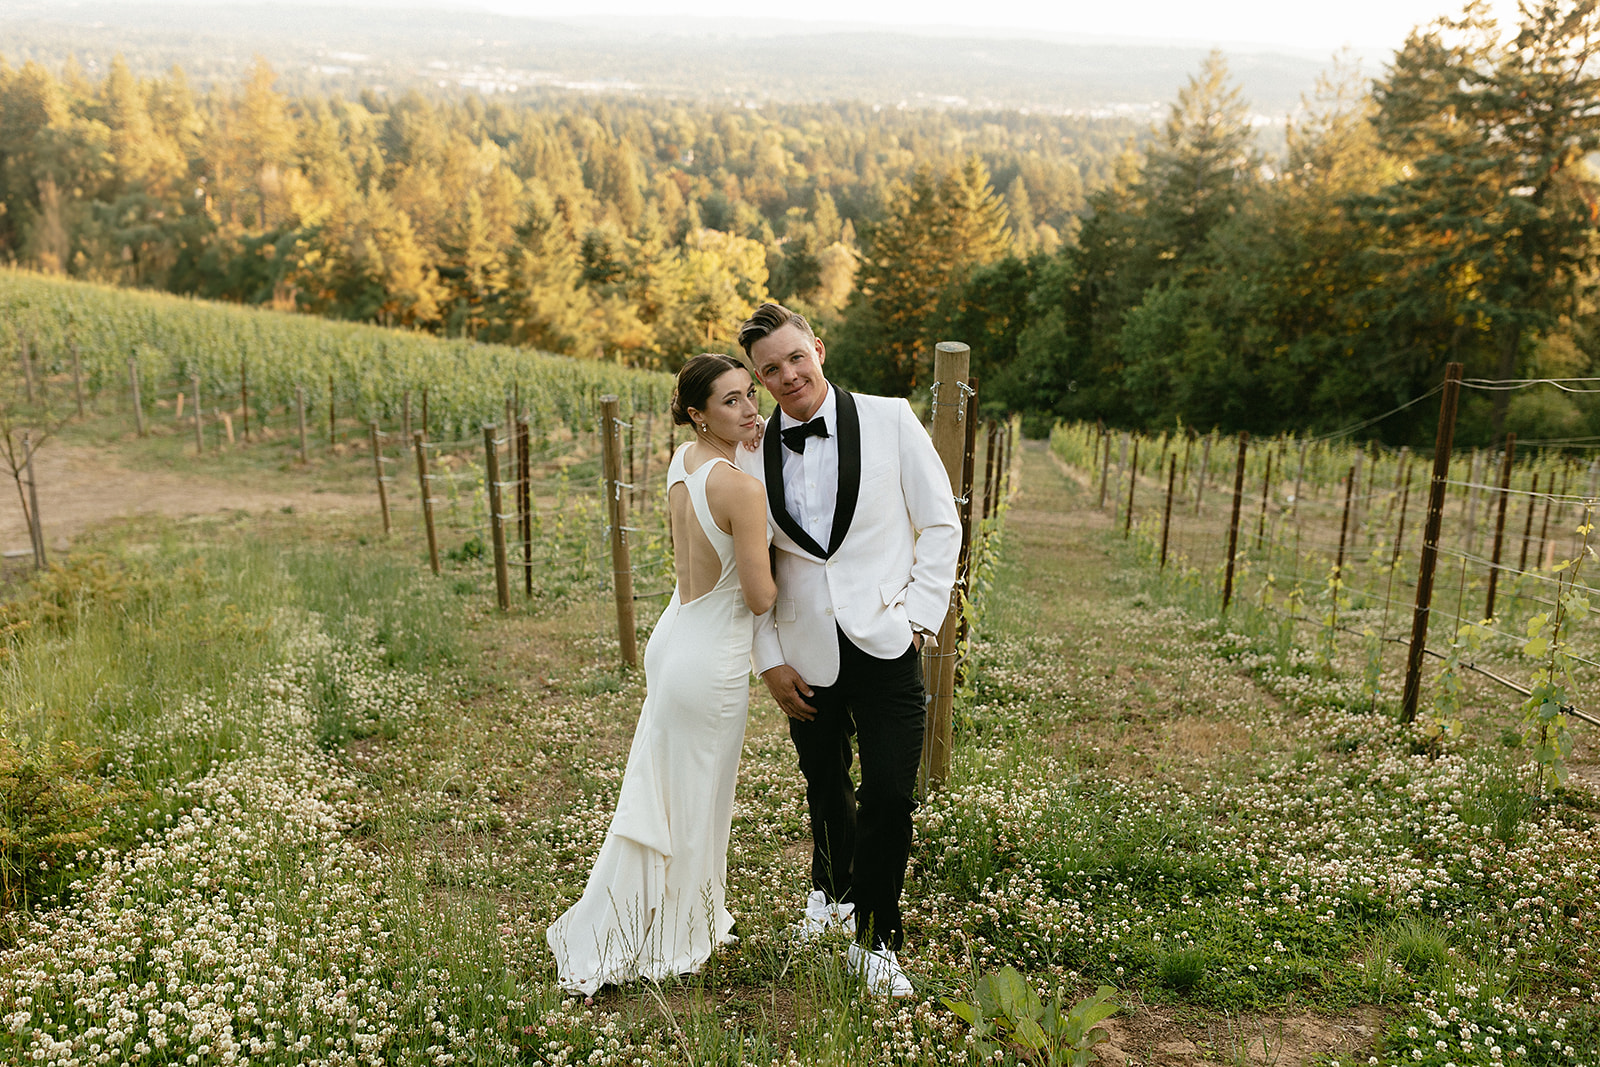 golden hour photos of the bride and groom in the vineyards at amaterra winery